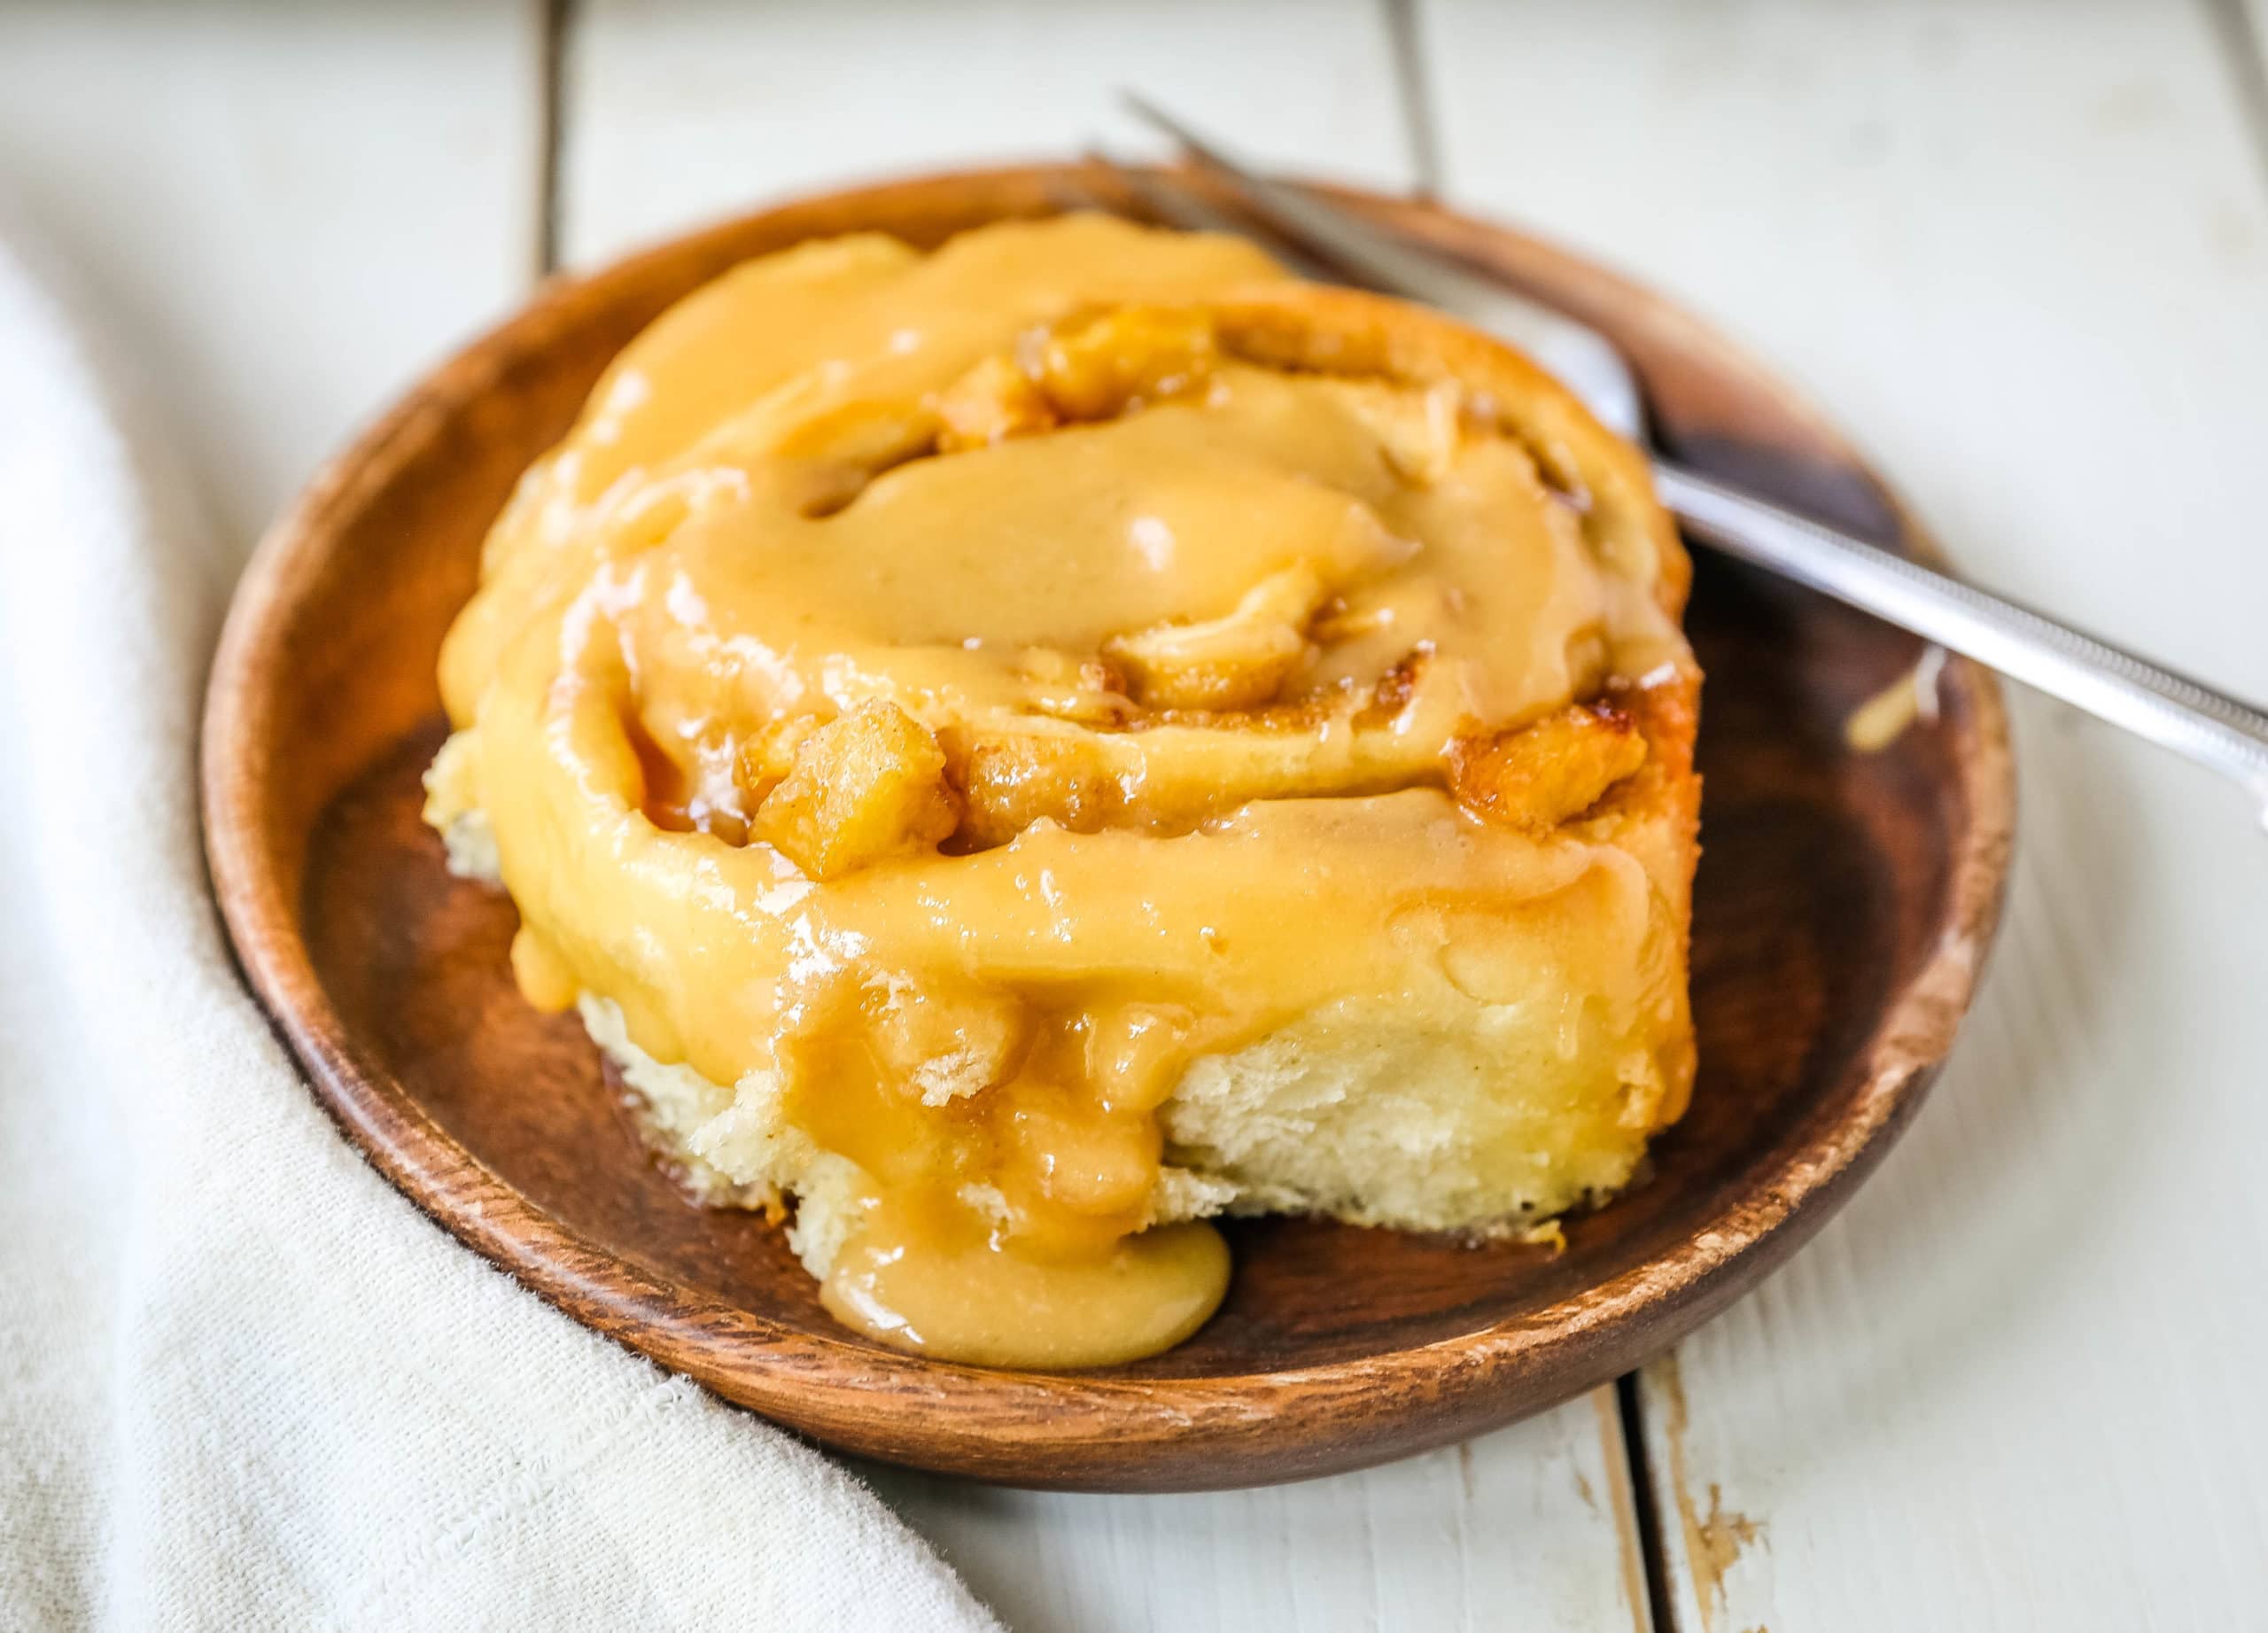 Caramel Apple Cinnamon Rolls Homemade salted caramel paired with tart apples all rolled into and baked in a sweet dough. These Salted Caramel Apple Cinnamon Rolls will knock your socks off! www.modernhoney.com #cinnamonrolls #caramelrolls #caramelapplerolls